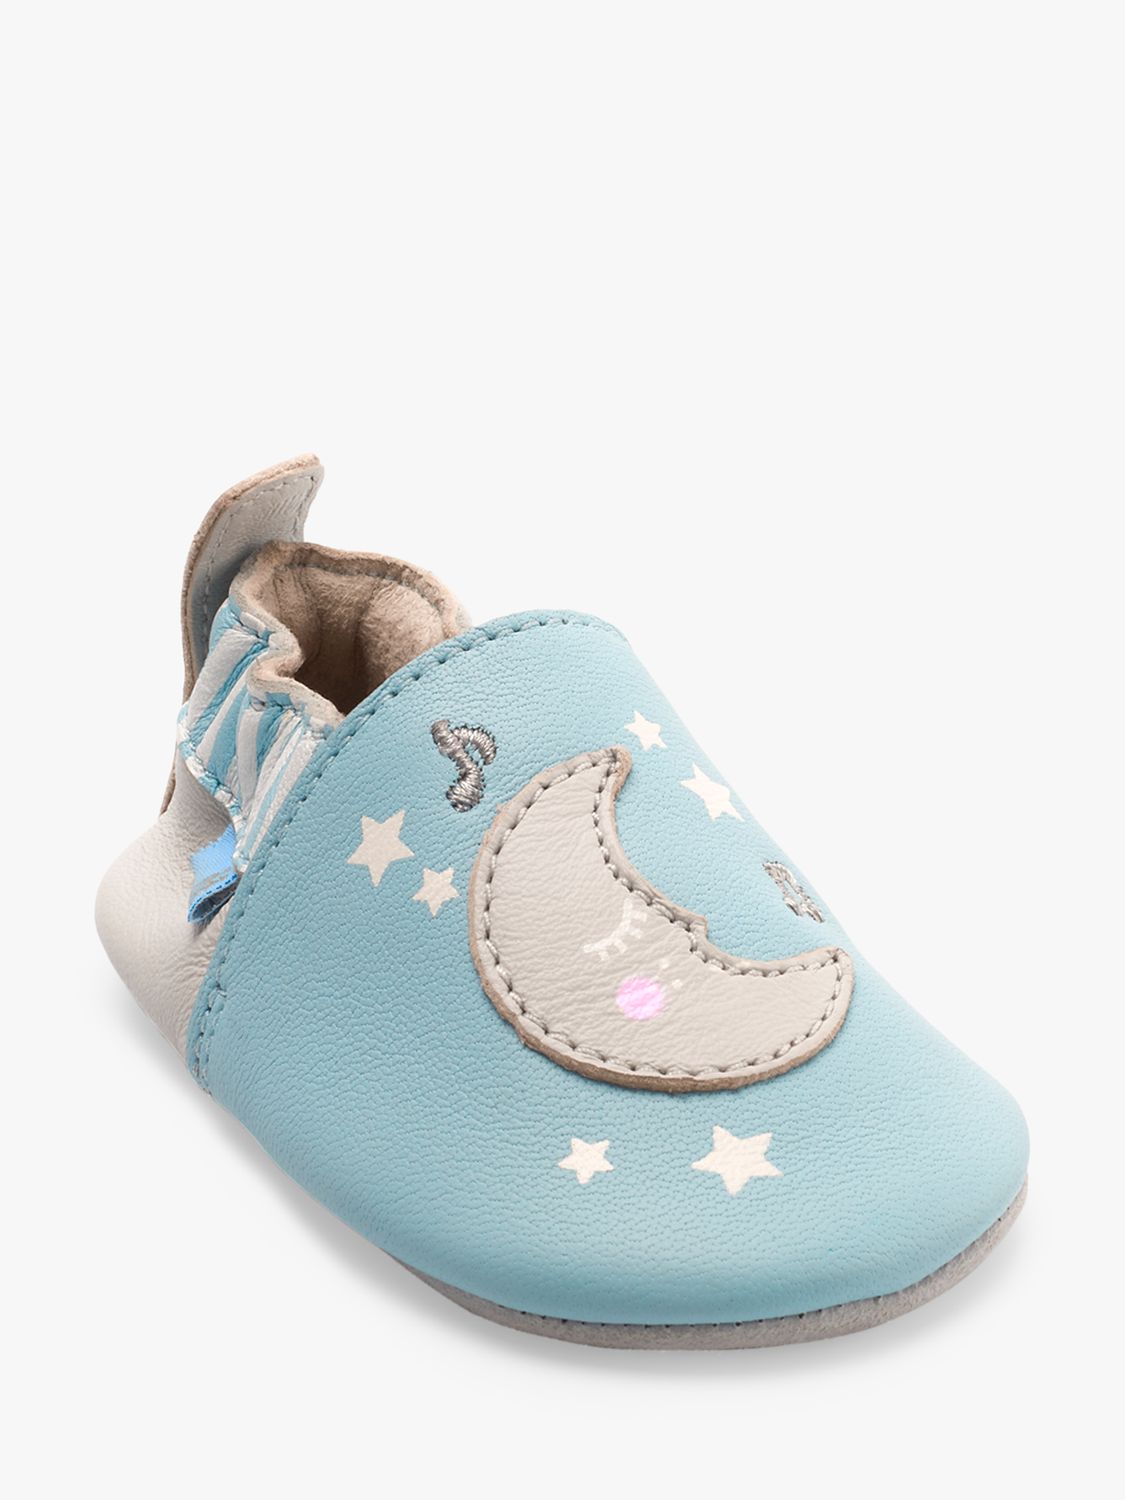 Buy Start-Rite Kids' Lullaby Fable Shoes Online at johnlewis.com